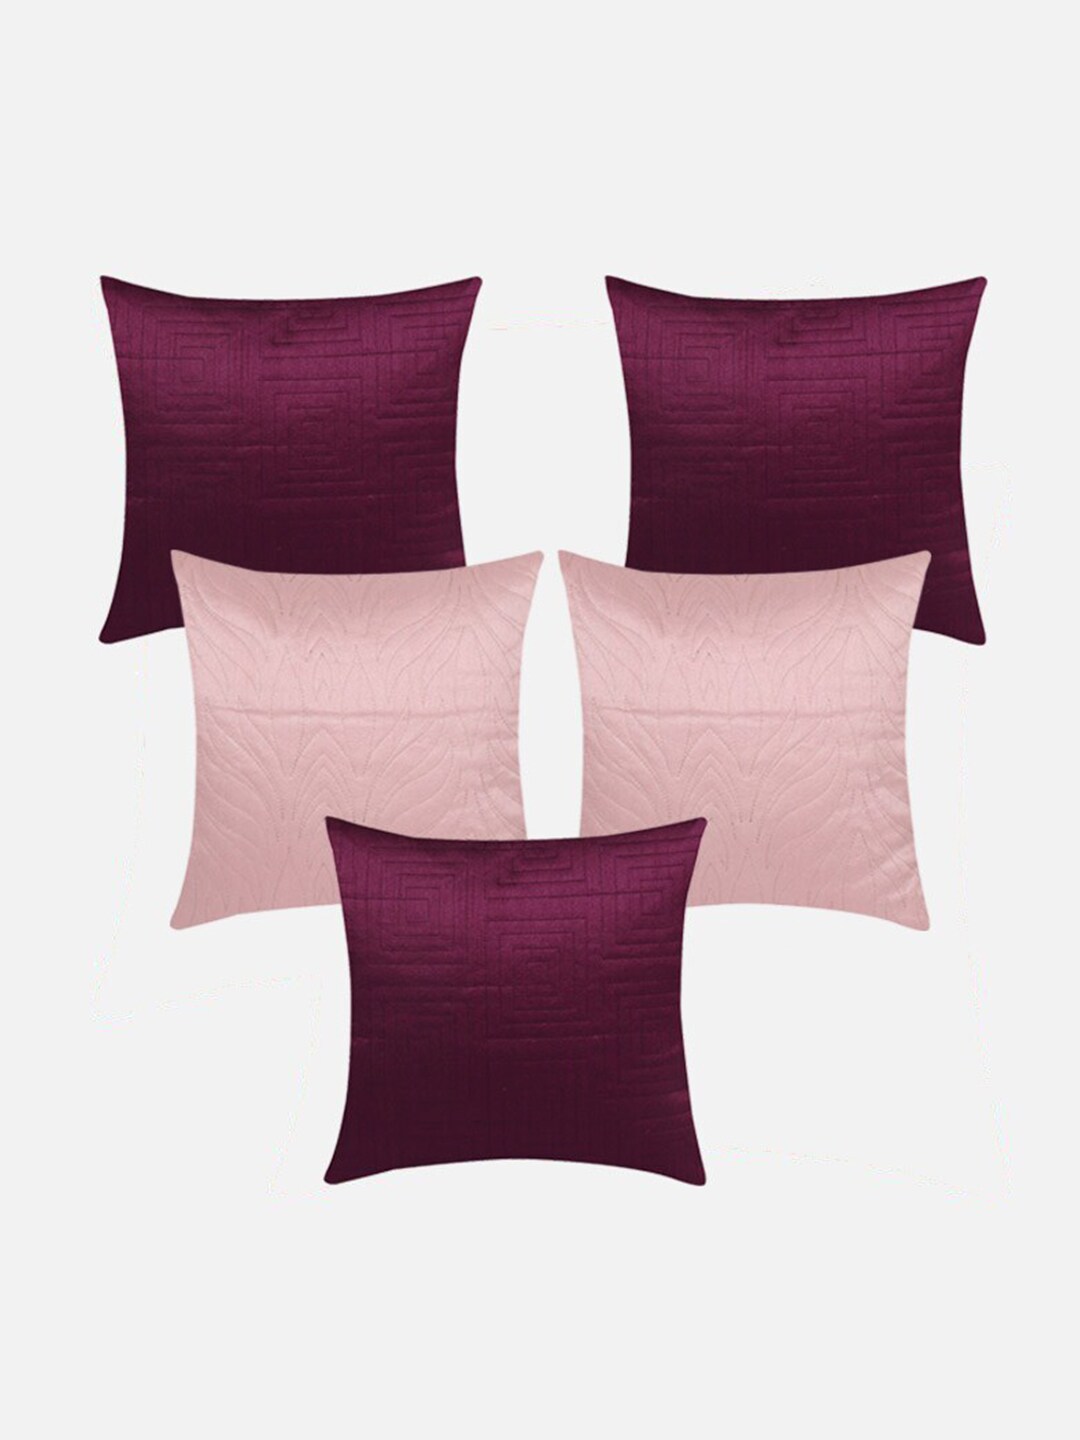 Molcha Pink & Purple Set of 5 Square Cushion Covers Price in India